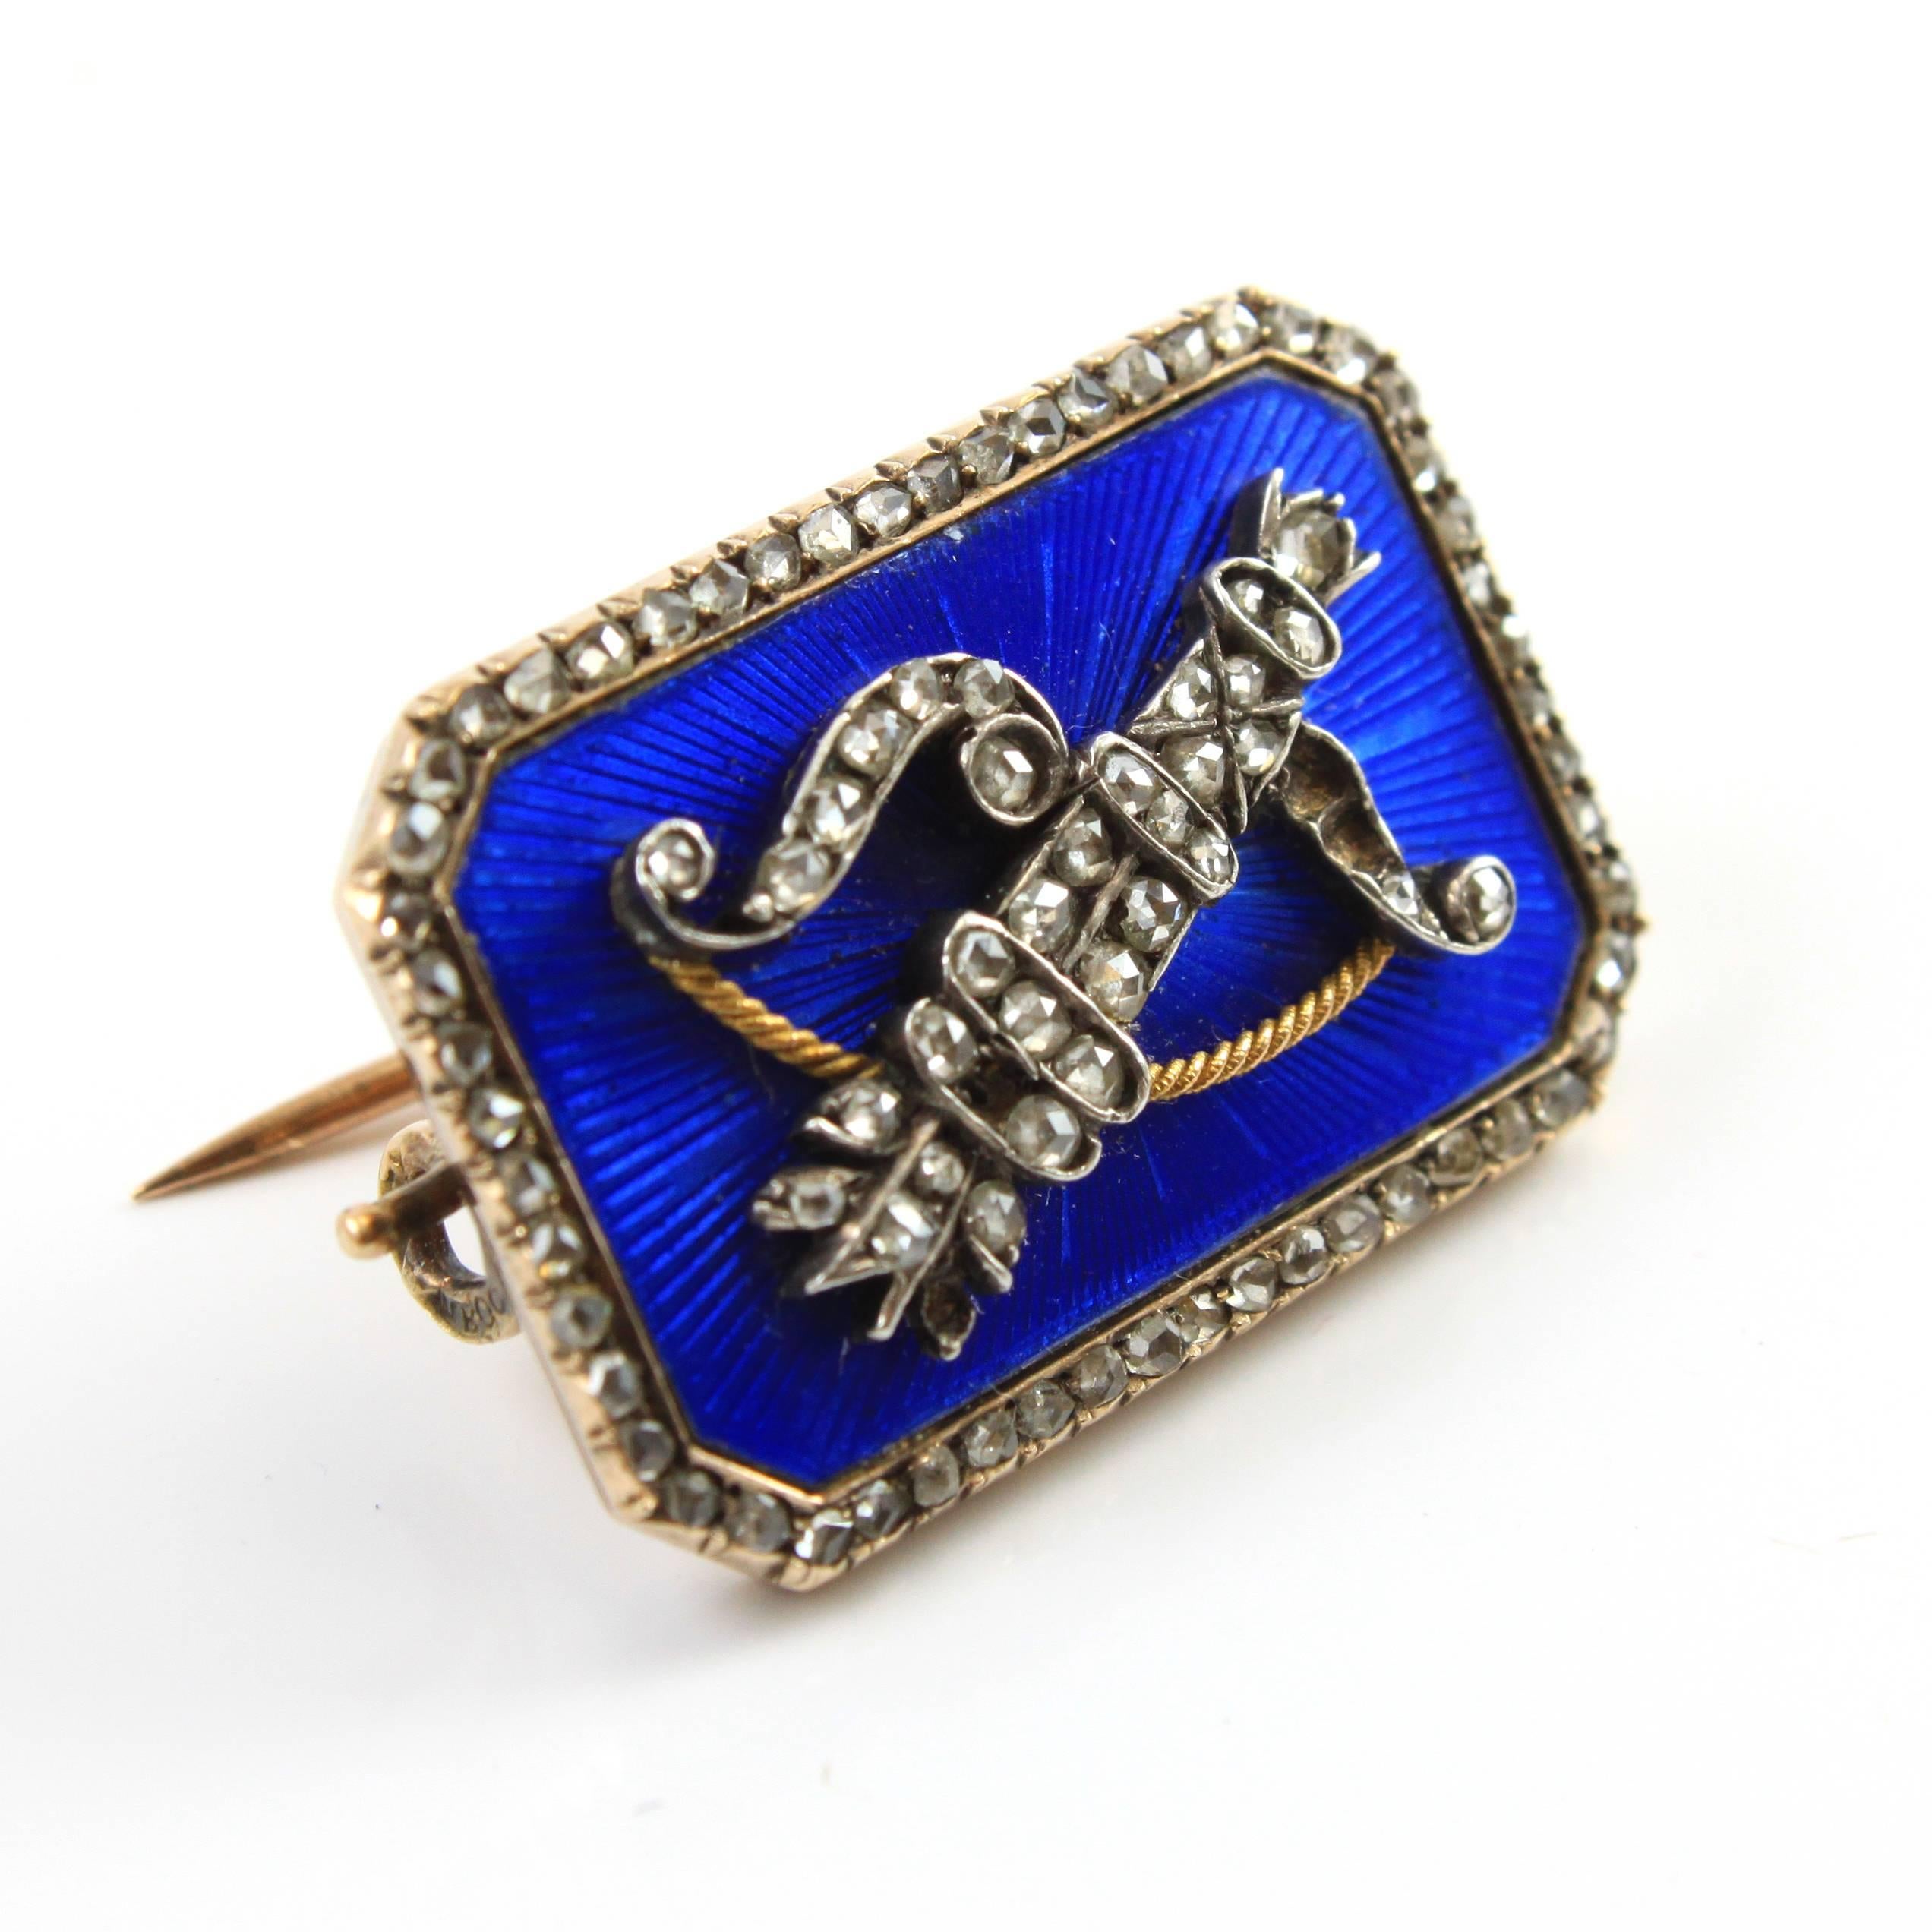 A beautiful and rare Enamel and Diamond Broach, by Fabergé work master Erik August Kollin, ca. 1890s

The broach features a stylised bow and arrow, studded with diamonds and based on a fine and very reflective blue guilloche enamel work.

About